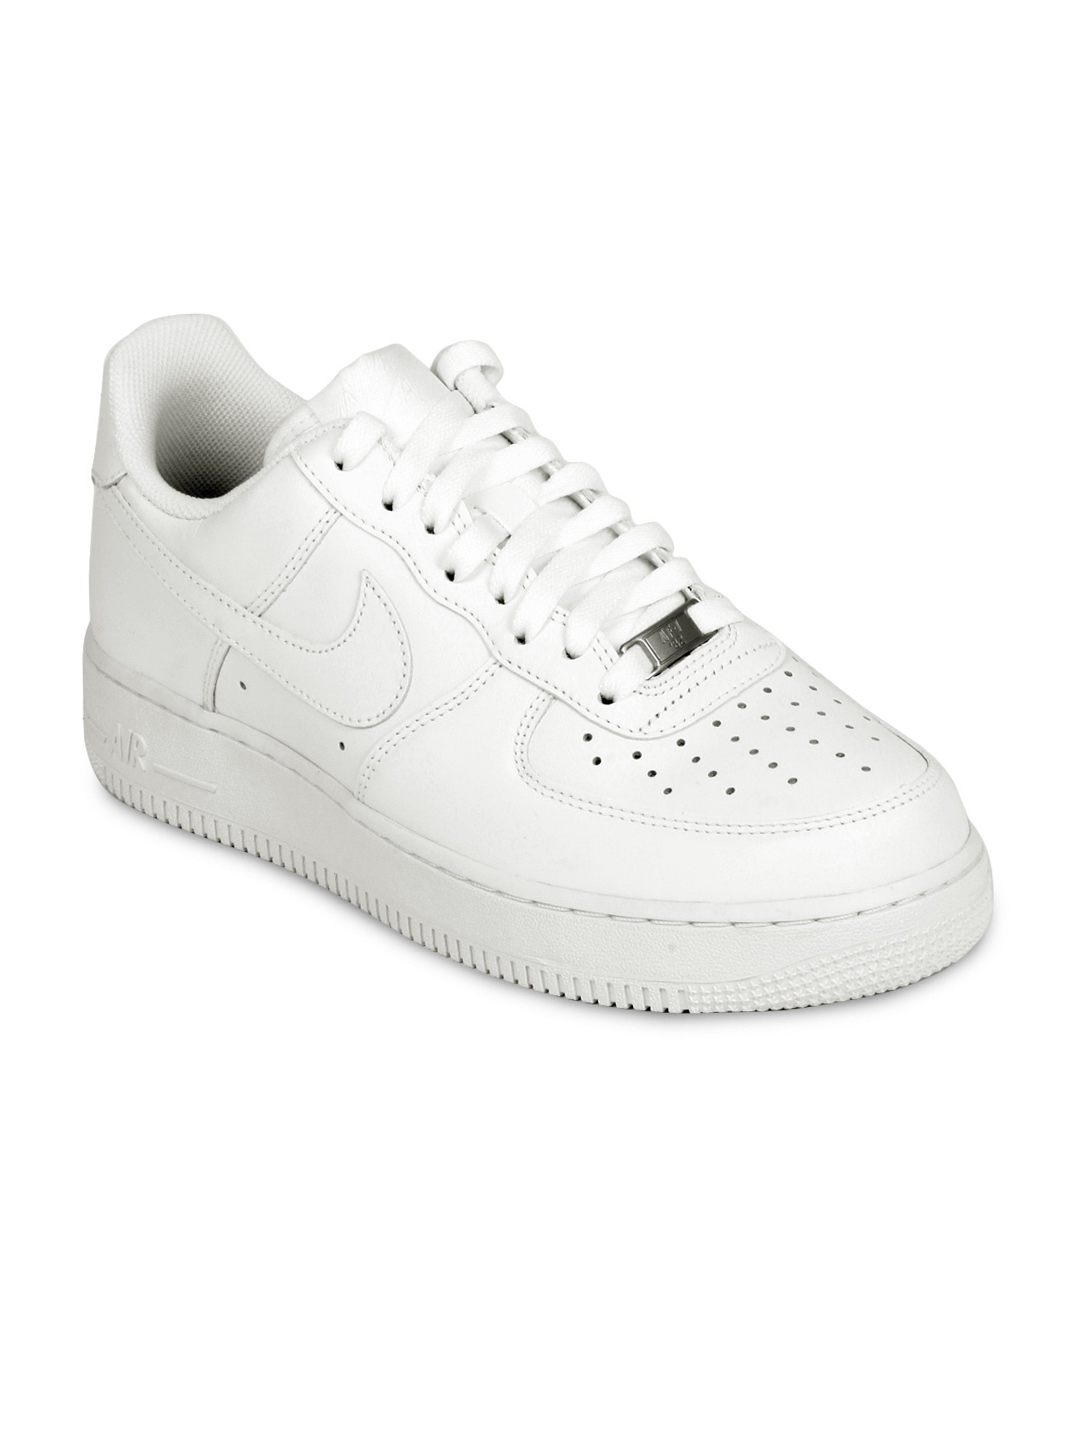 nike air force 1 white sneakers